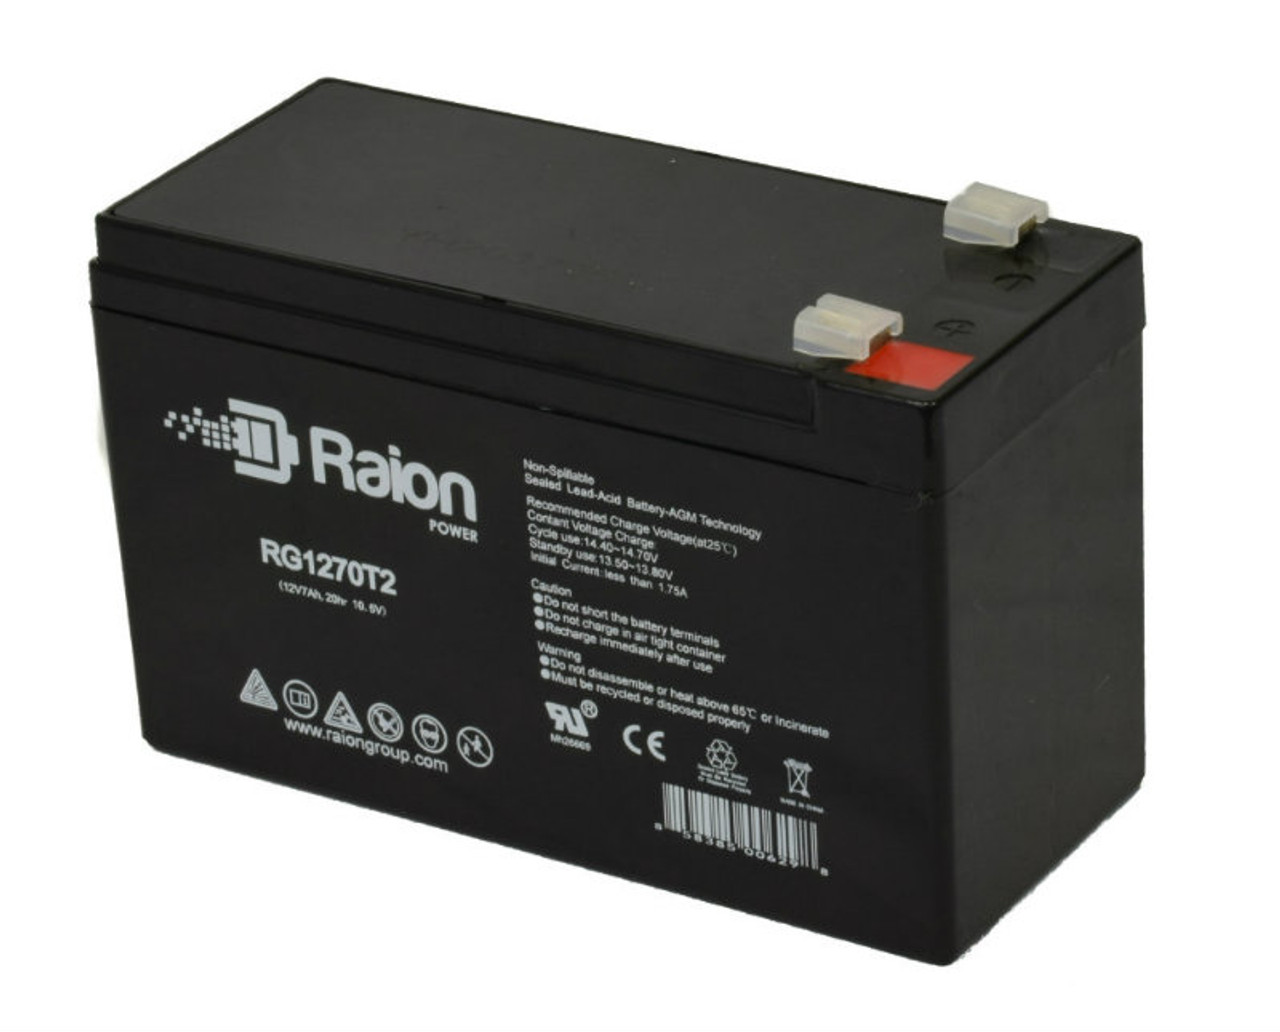 Raion Power RG1270T1 12V 7Ah Non-Spillable Replacement Battery for National Battery NB12-7